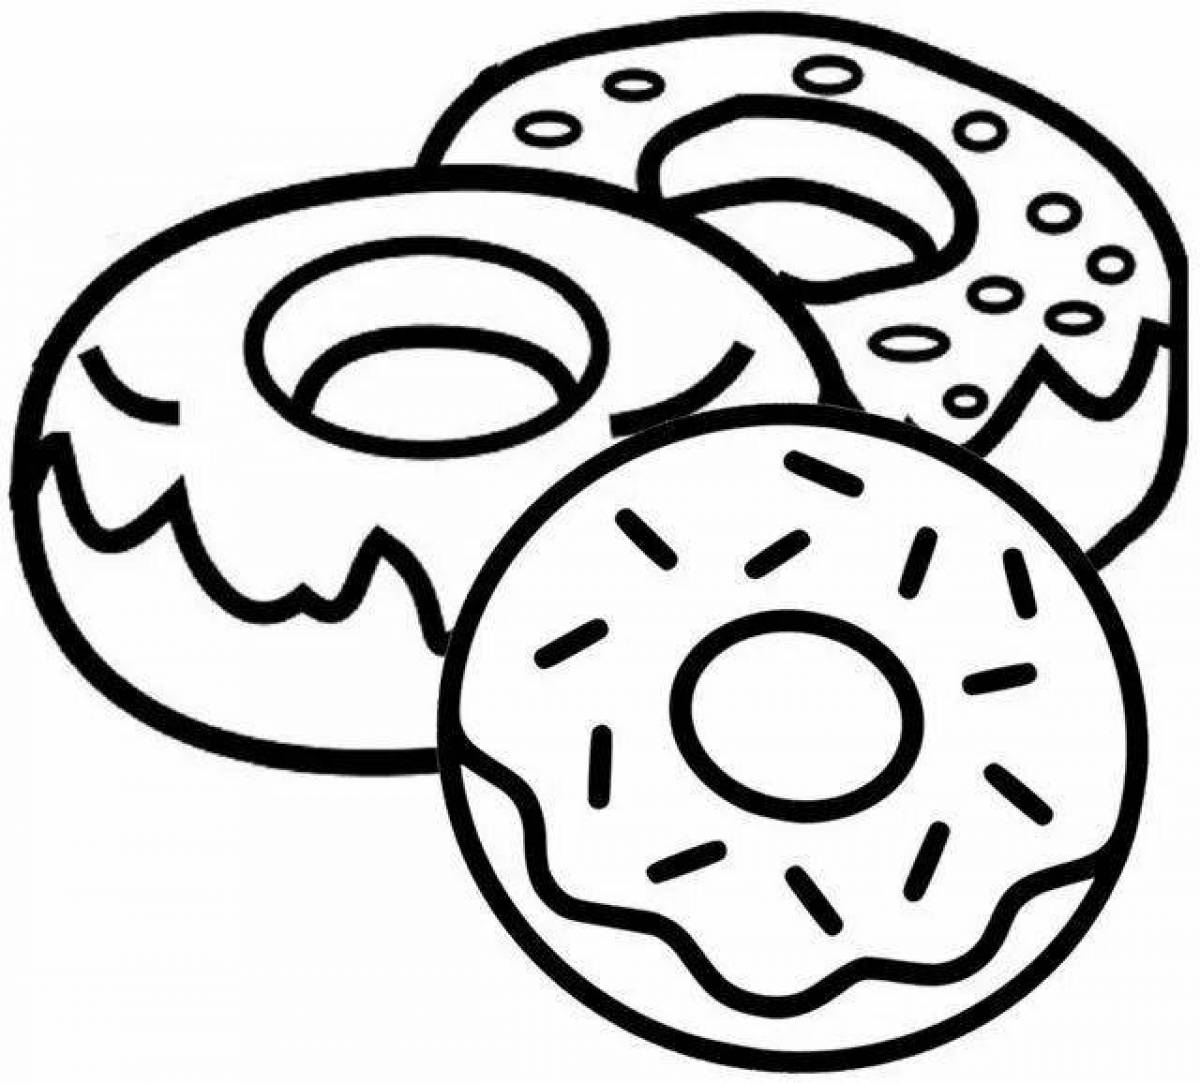 Attractive donut coloring for kids